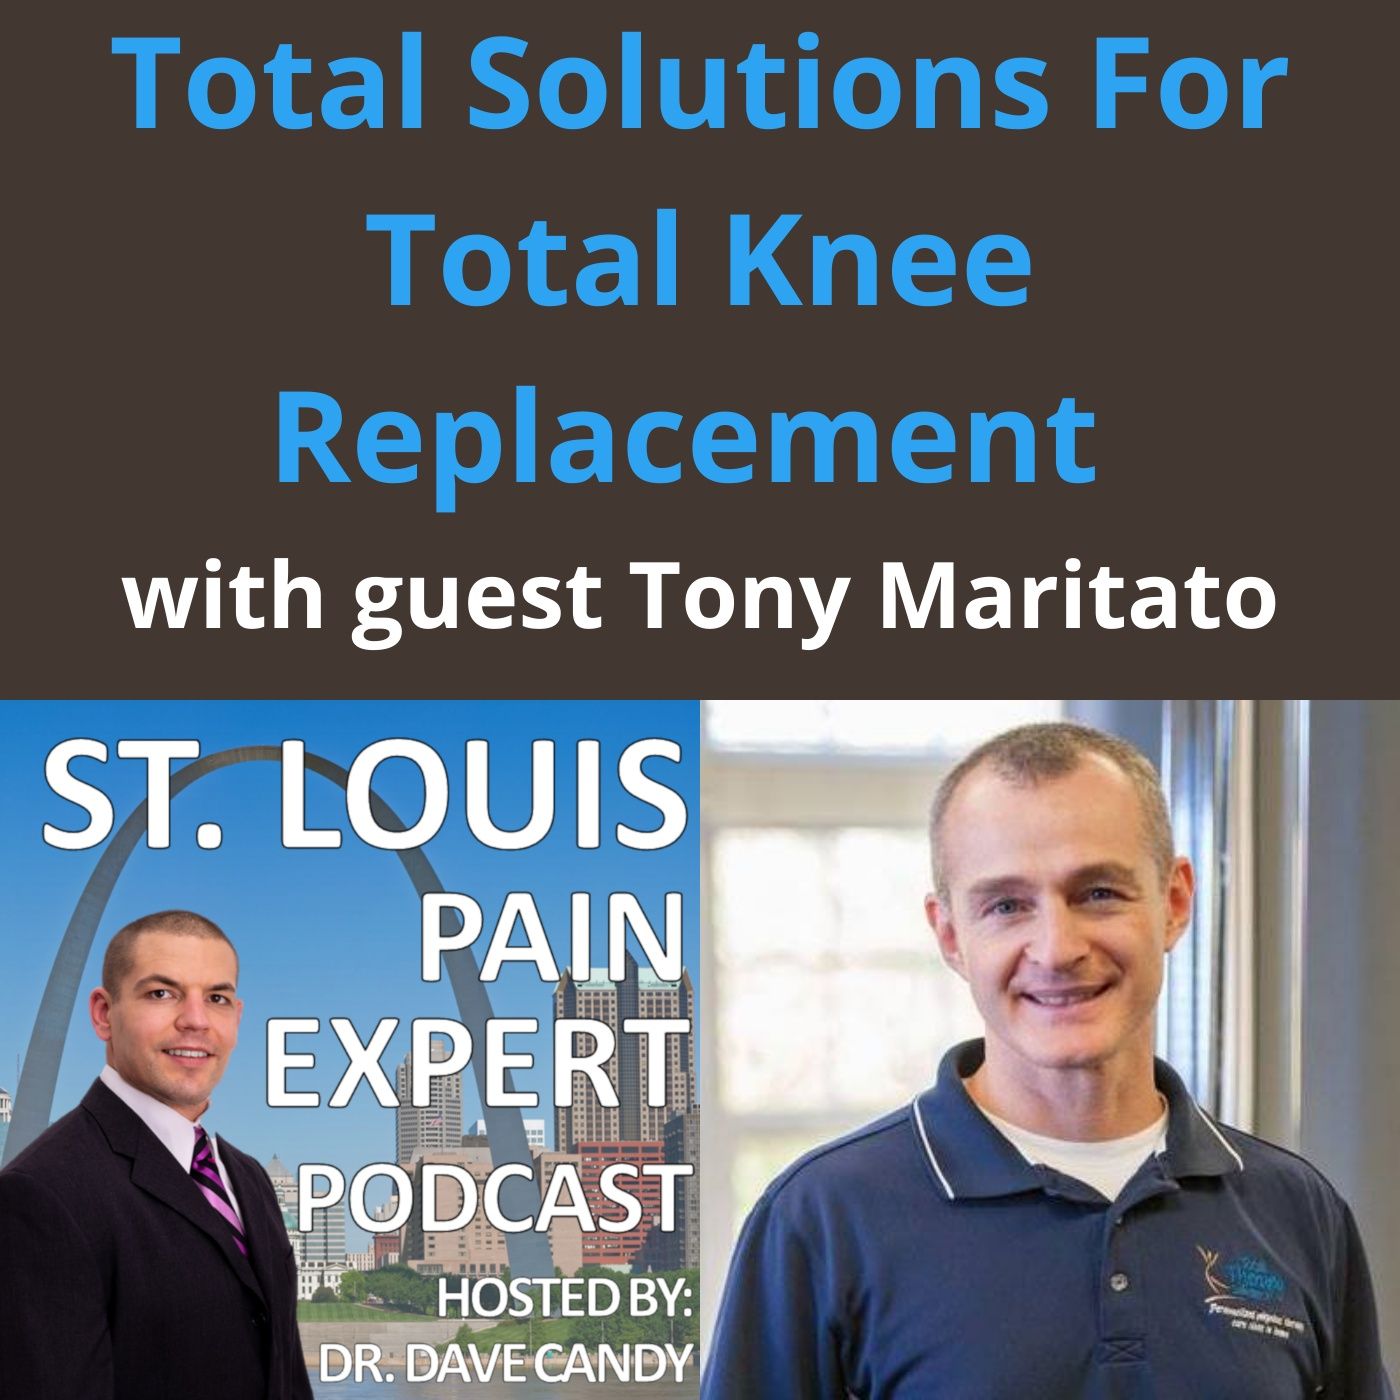 Total Solutions For Total Knee Replacement with Tony Maritato